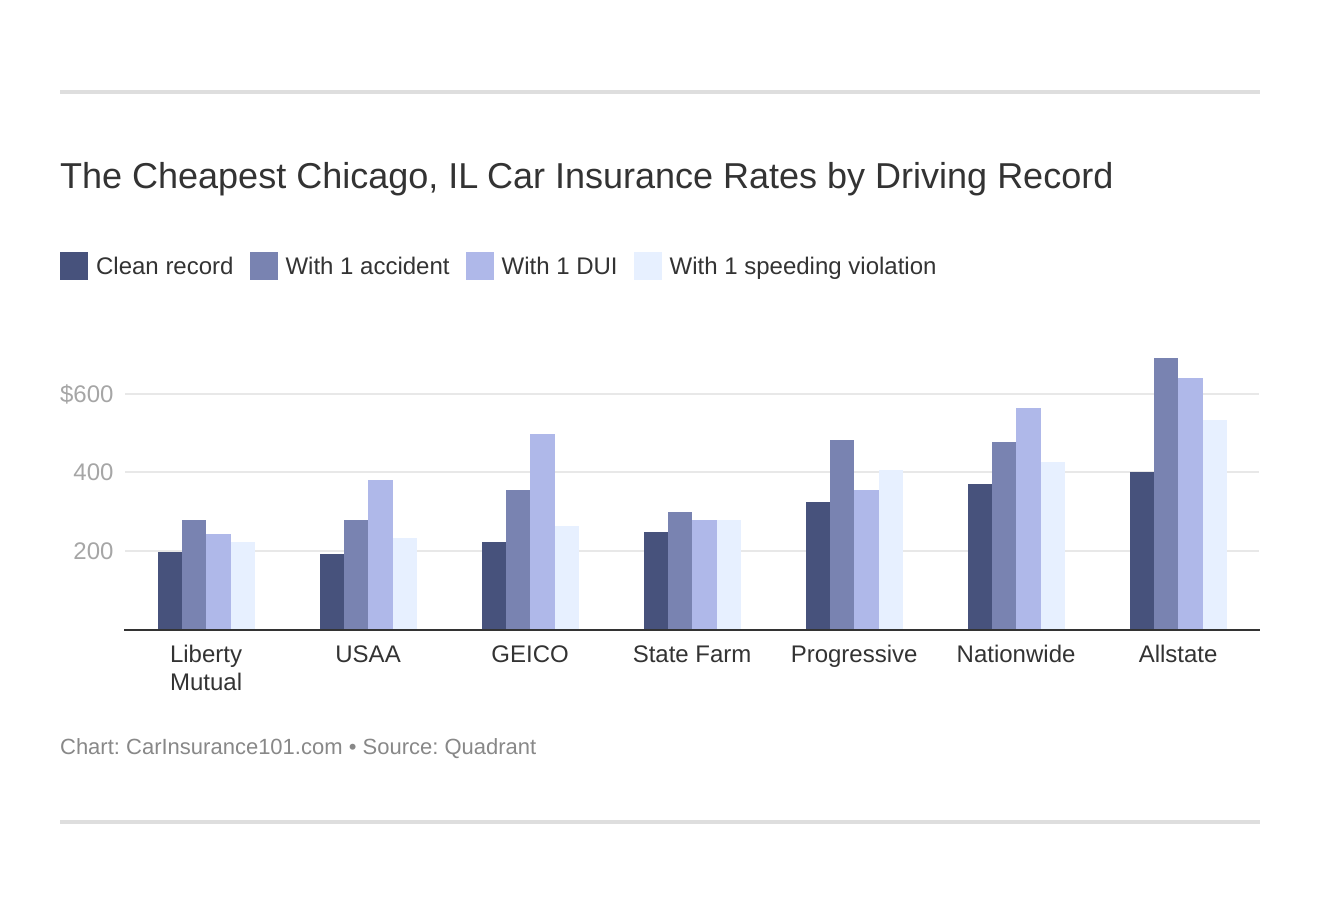 The Cheapest Chicago, IL Car Insurance Rates by Driving Record